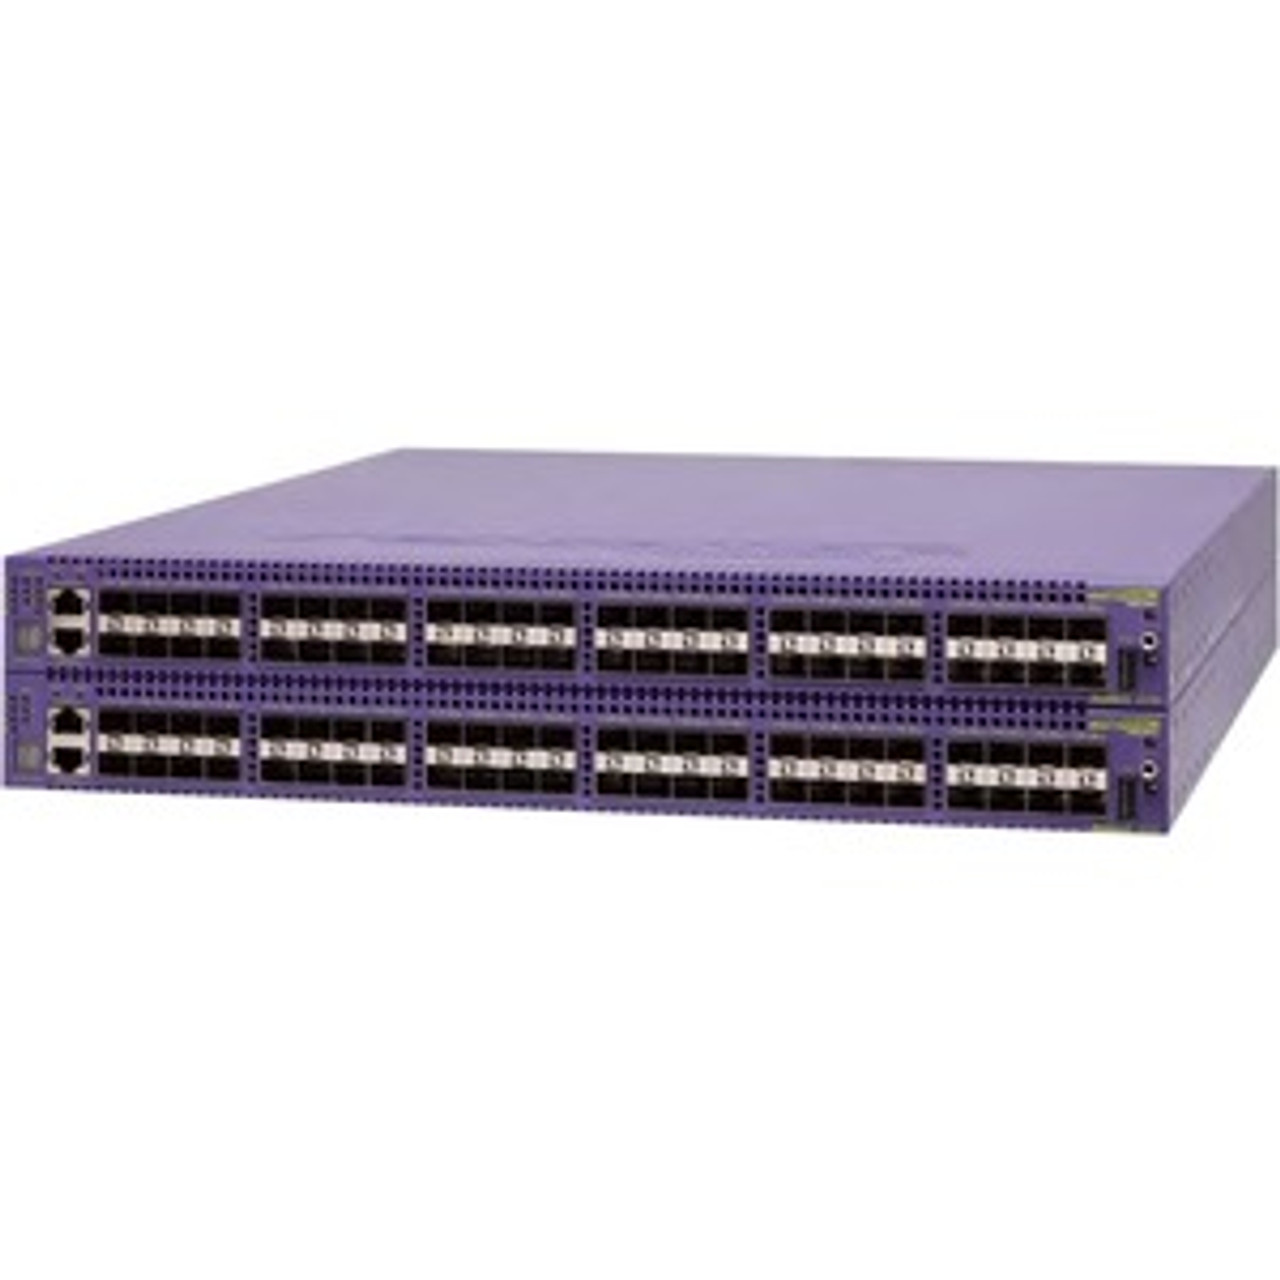 17104T Extreme Networks Summit X670-48x Layer 3 Switch - Manageable - 40 Gigabit Ethernet, 10 Gigabit Ethernet - 40GBase-X, 10GBase-X - 3 Layer Supported -